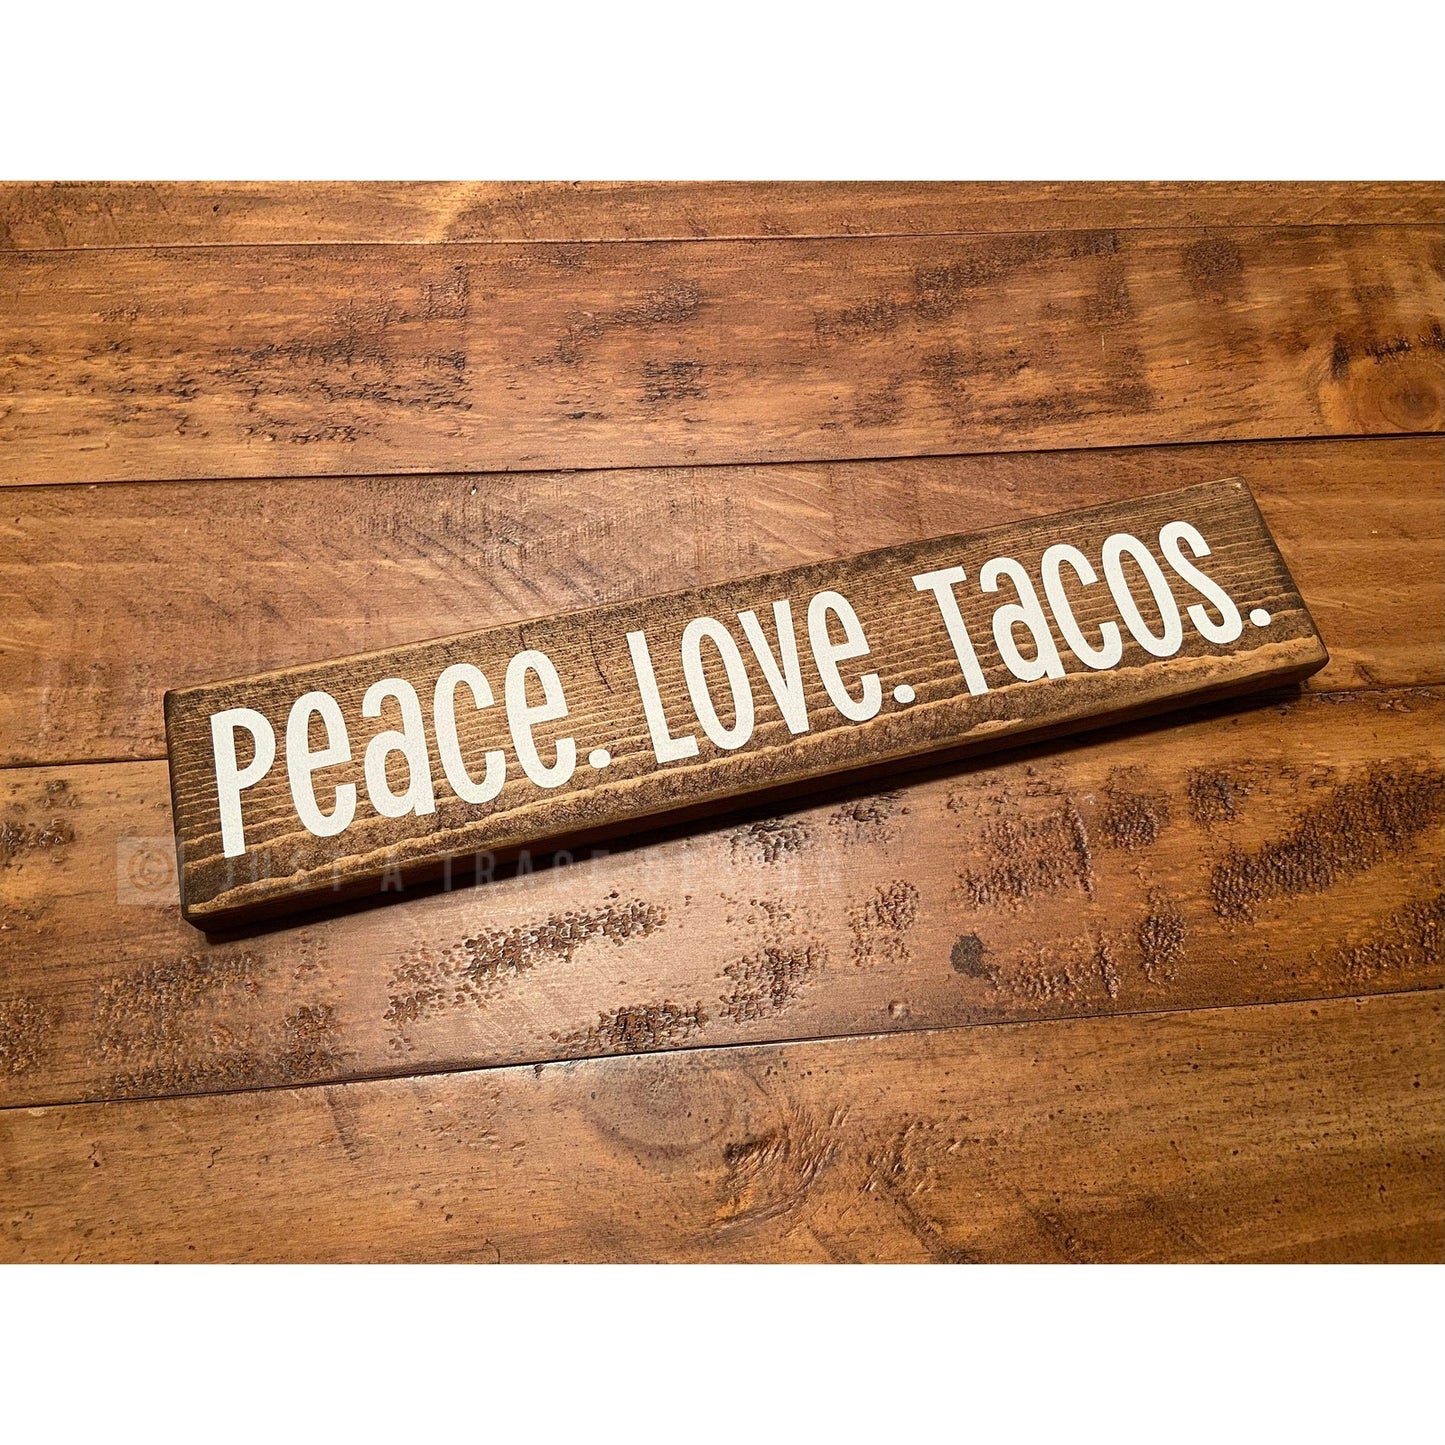 Peace. Love. Tacos.  Sign - Wooden Sign - Home Decor - Shelf Sitter - 12" x 2.25"